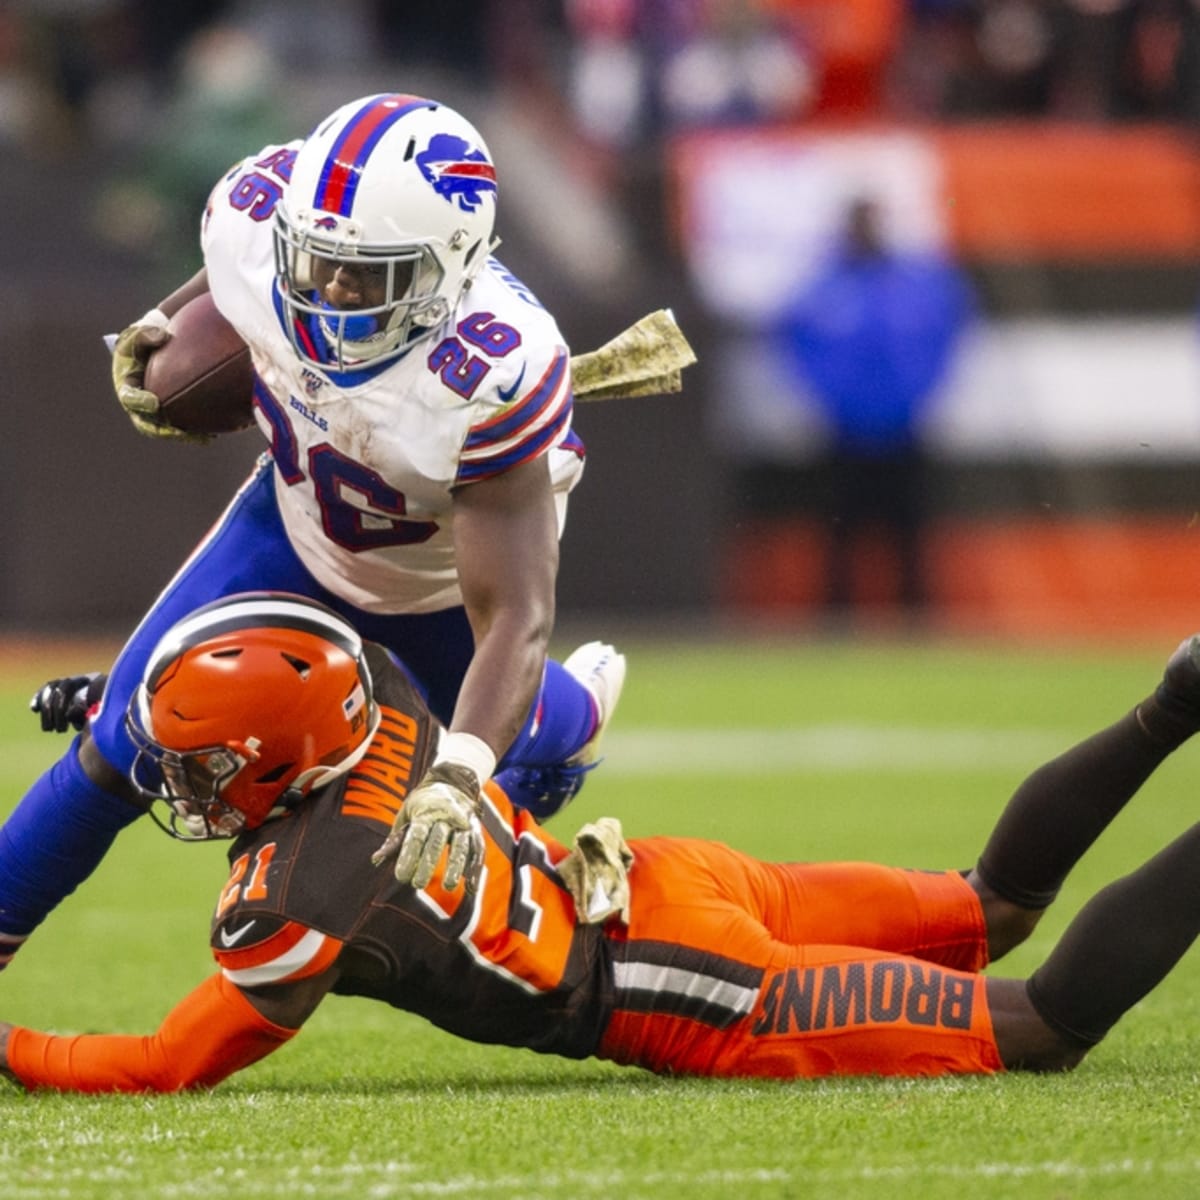 NFL Week 11 streaming guide: How to watch today's Cleveland Browns -  Buffalo Bills game - CBS News